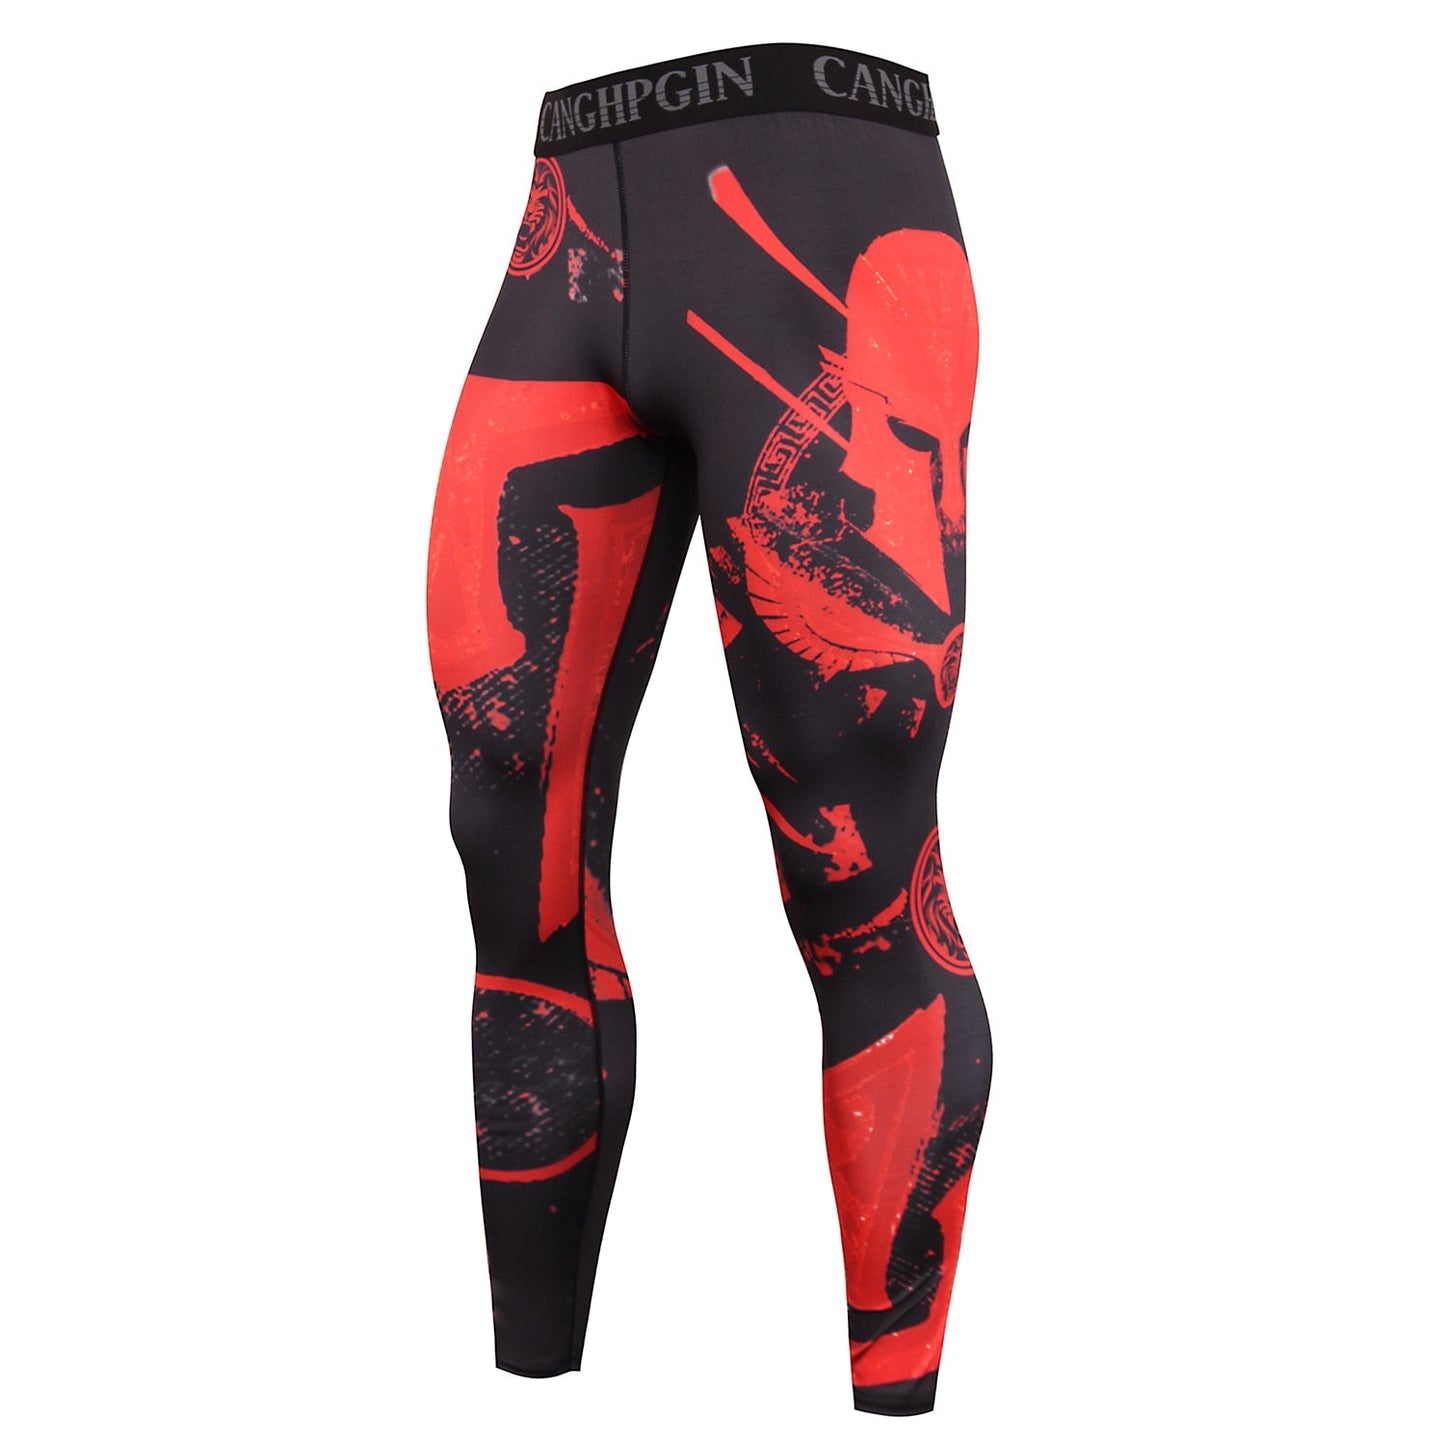 LEGGING SPORT RED COMPACT